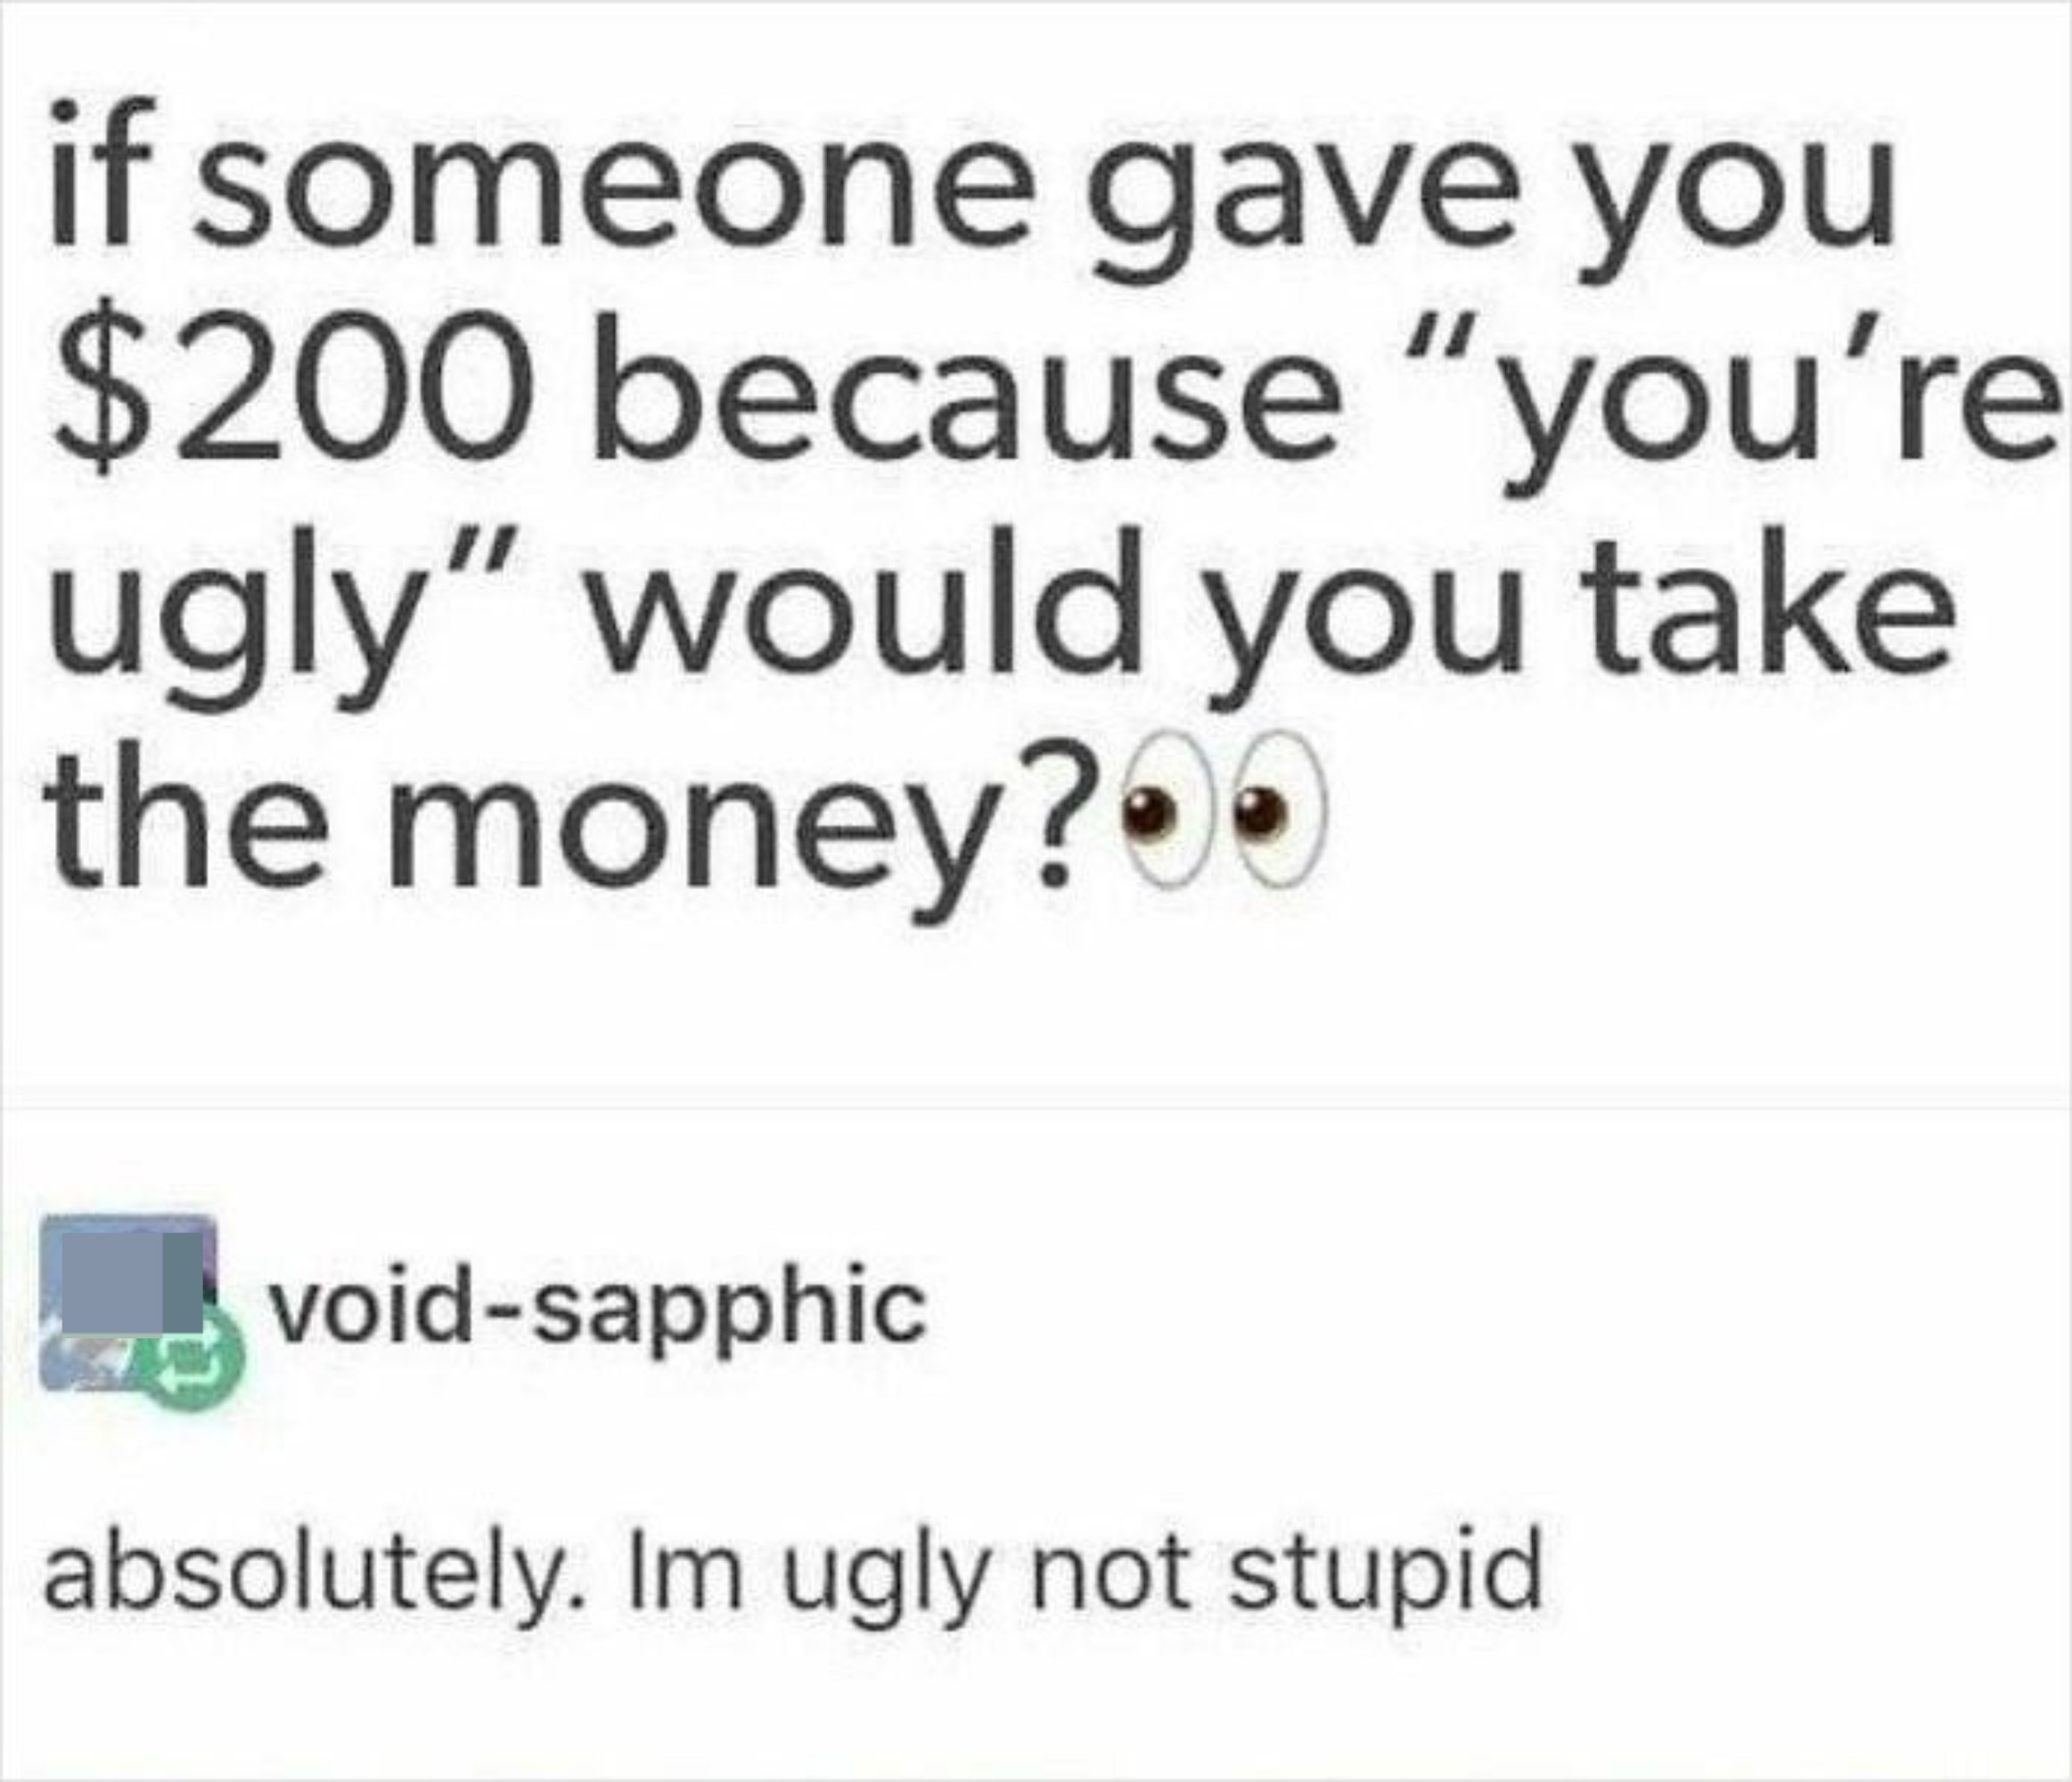 if someone gave you $200 because you&#x27;re ugly would you take the money? someone answers: absolutely, i&#x27;m ugly not stupid